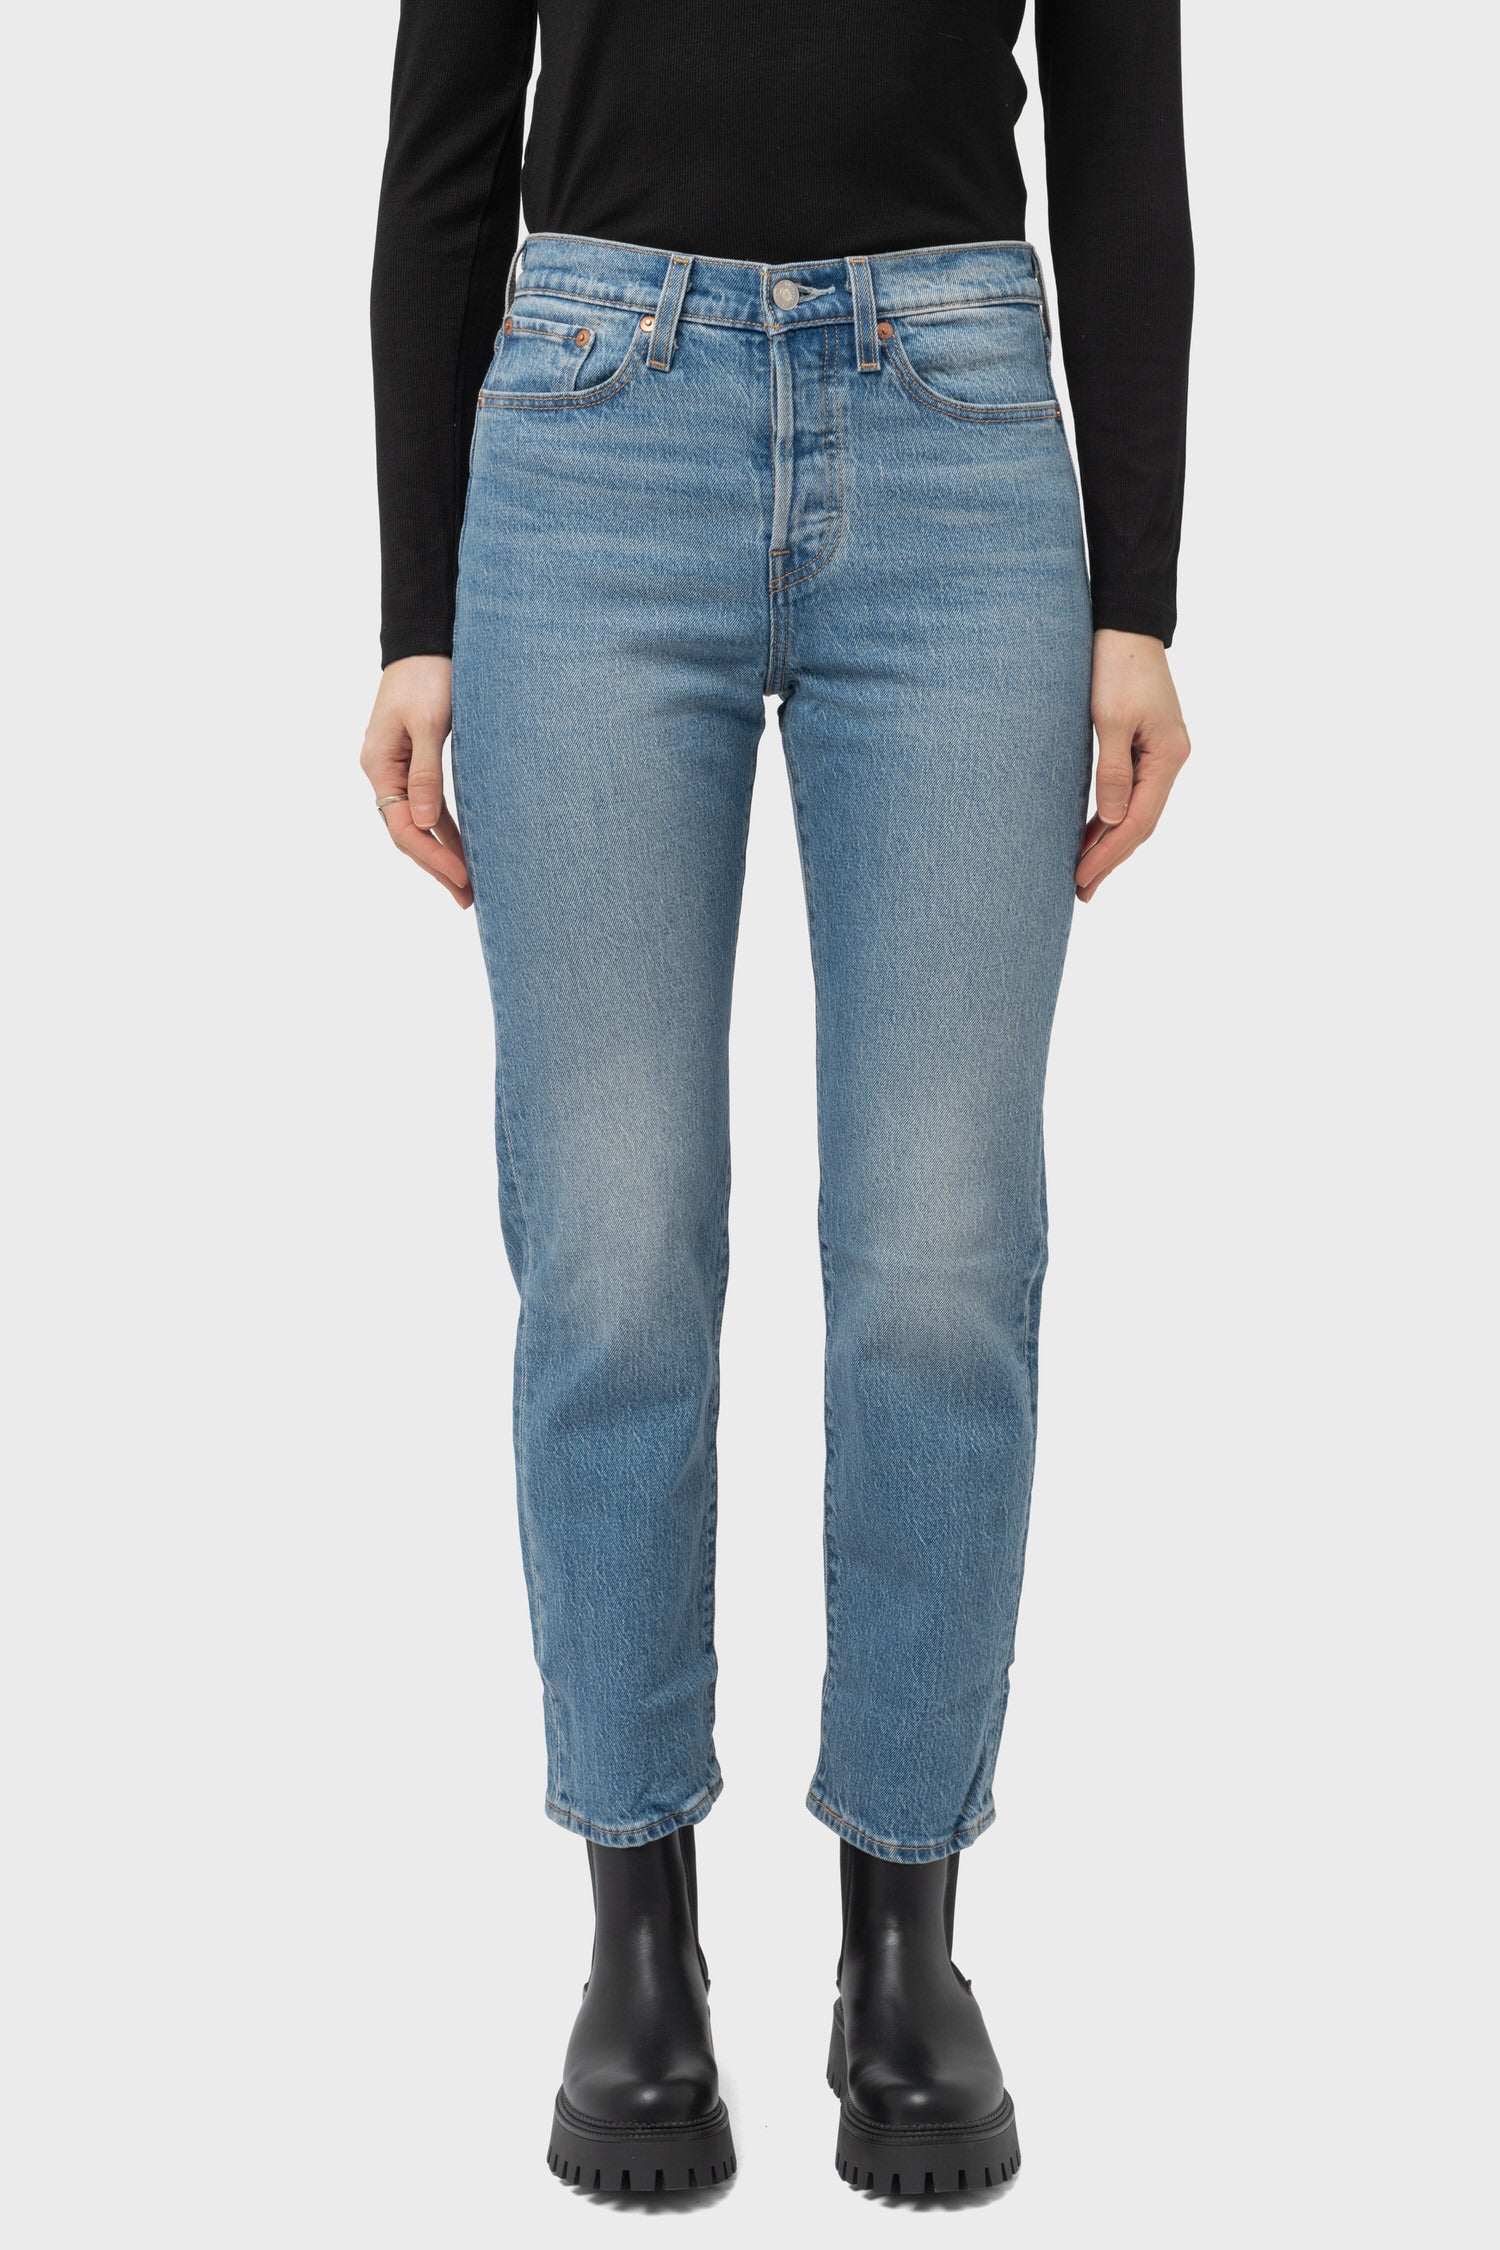 Women's Levi's Wedgie Straight Fit in Calling All Blues